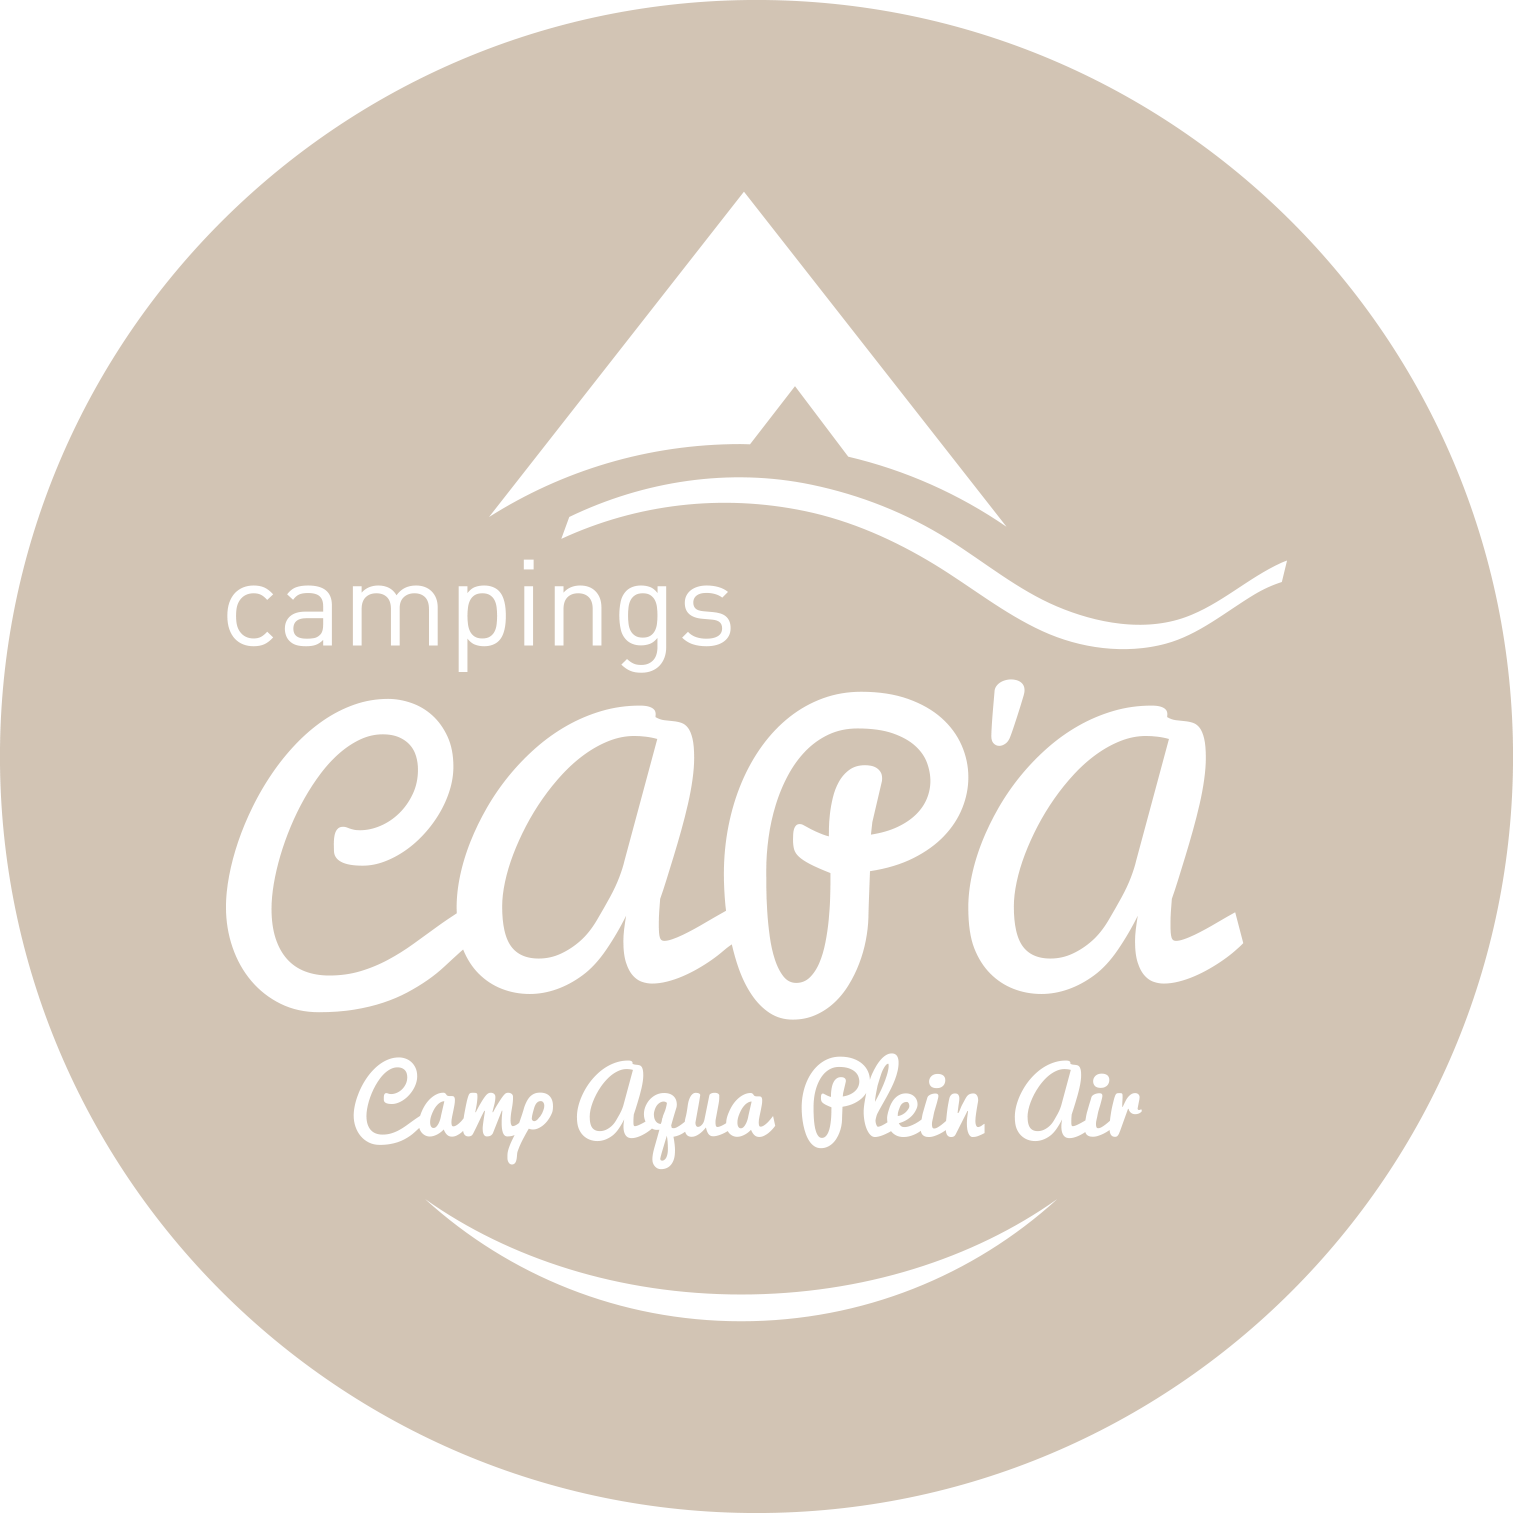 You are currently viewing CAP’A Campings